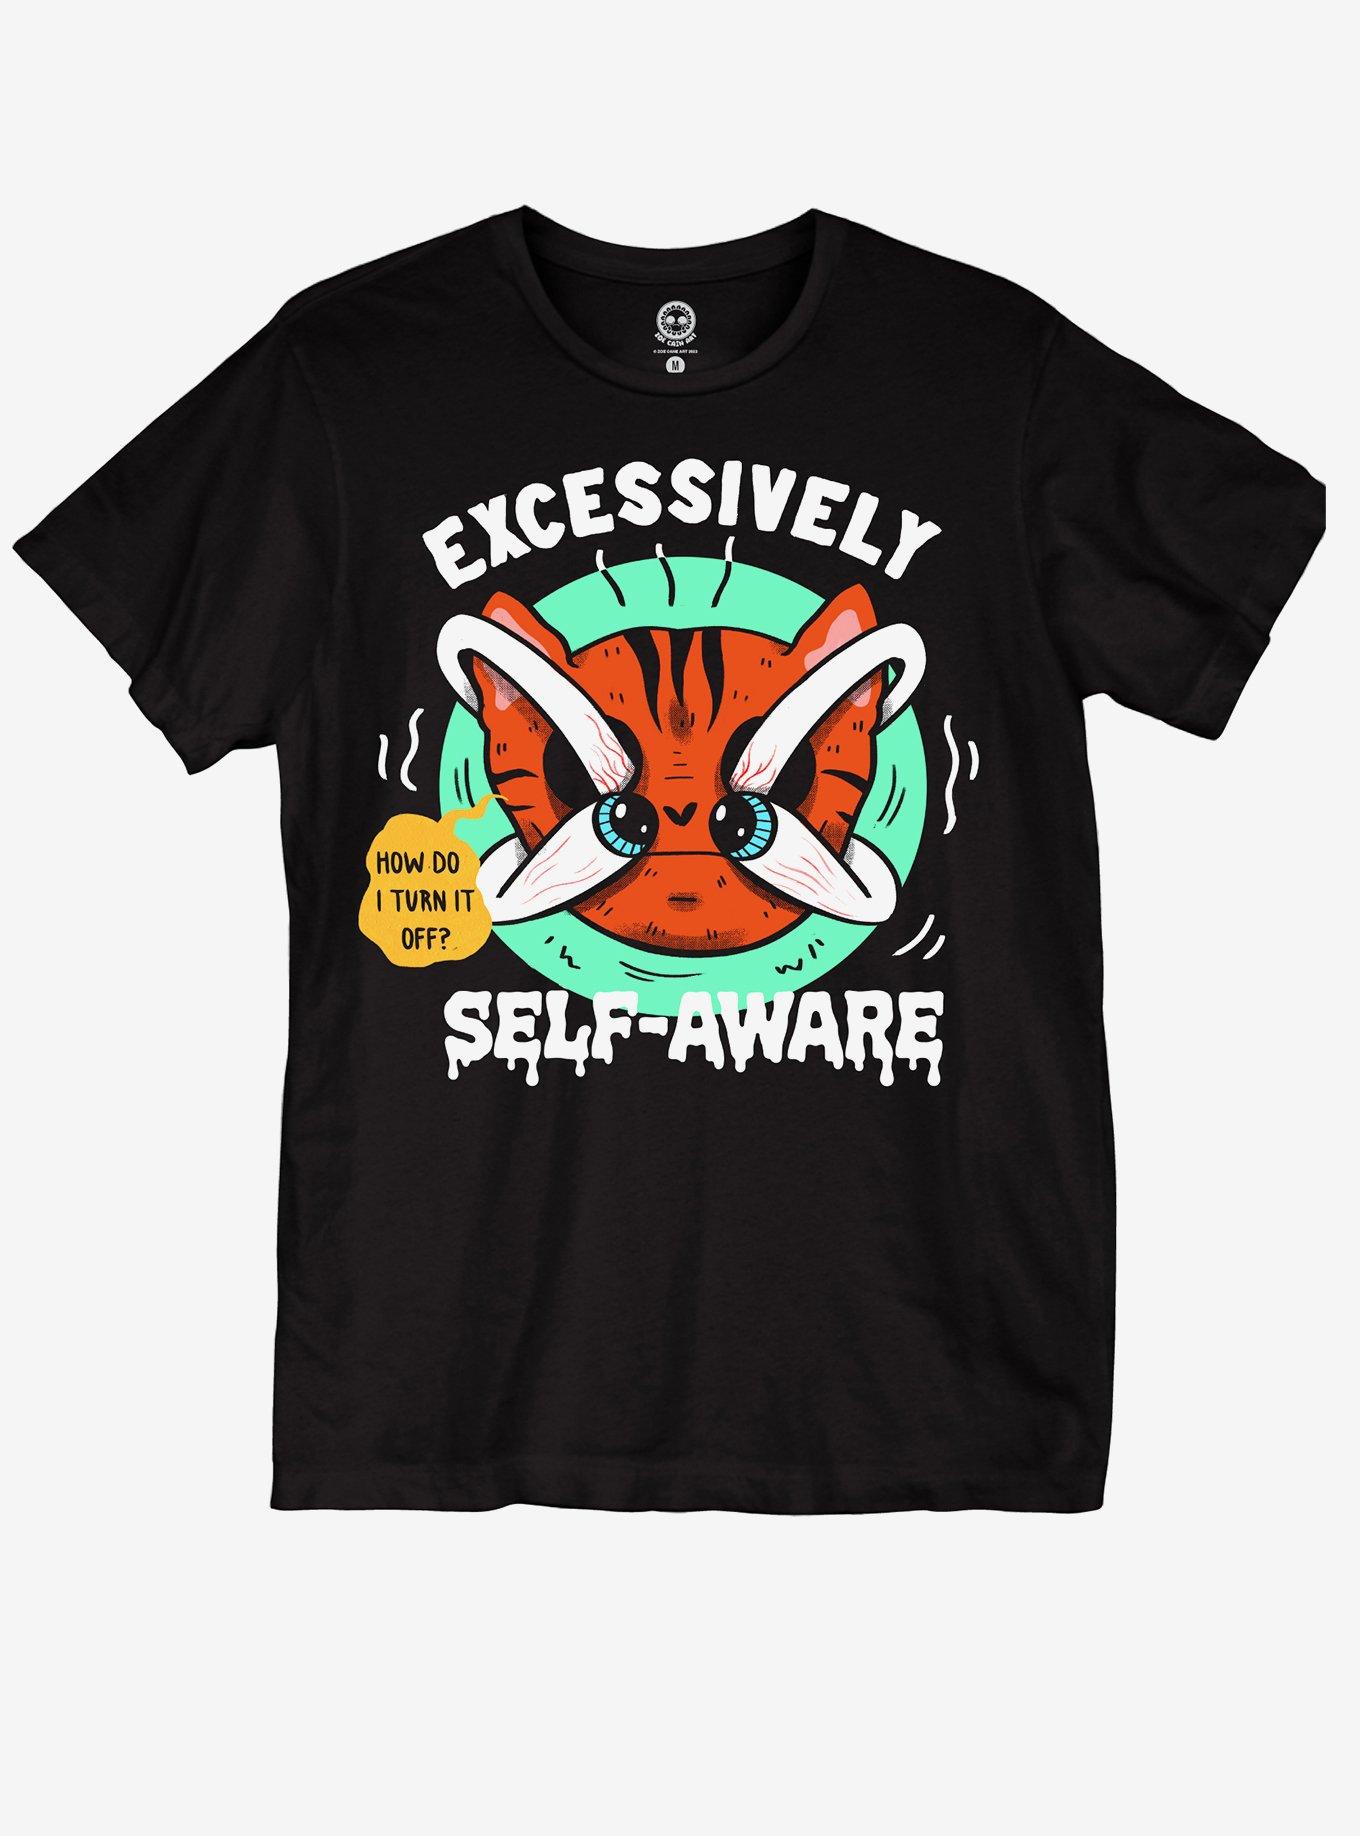 Excessively Self-Aware T-Shirt By Zoe Cain, BLACK, hi-res